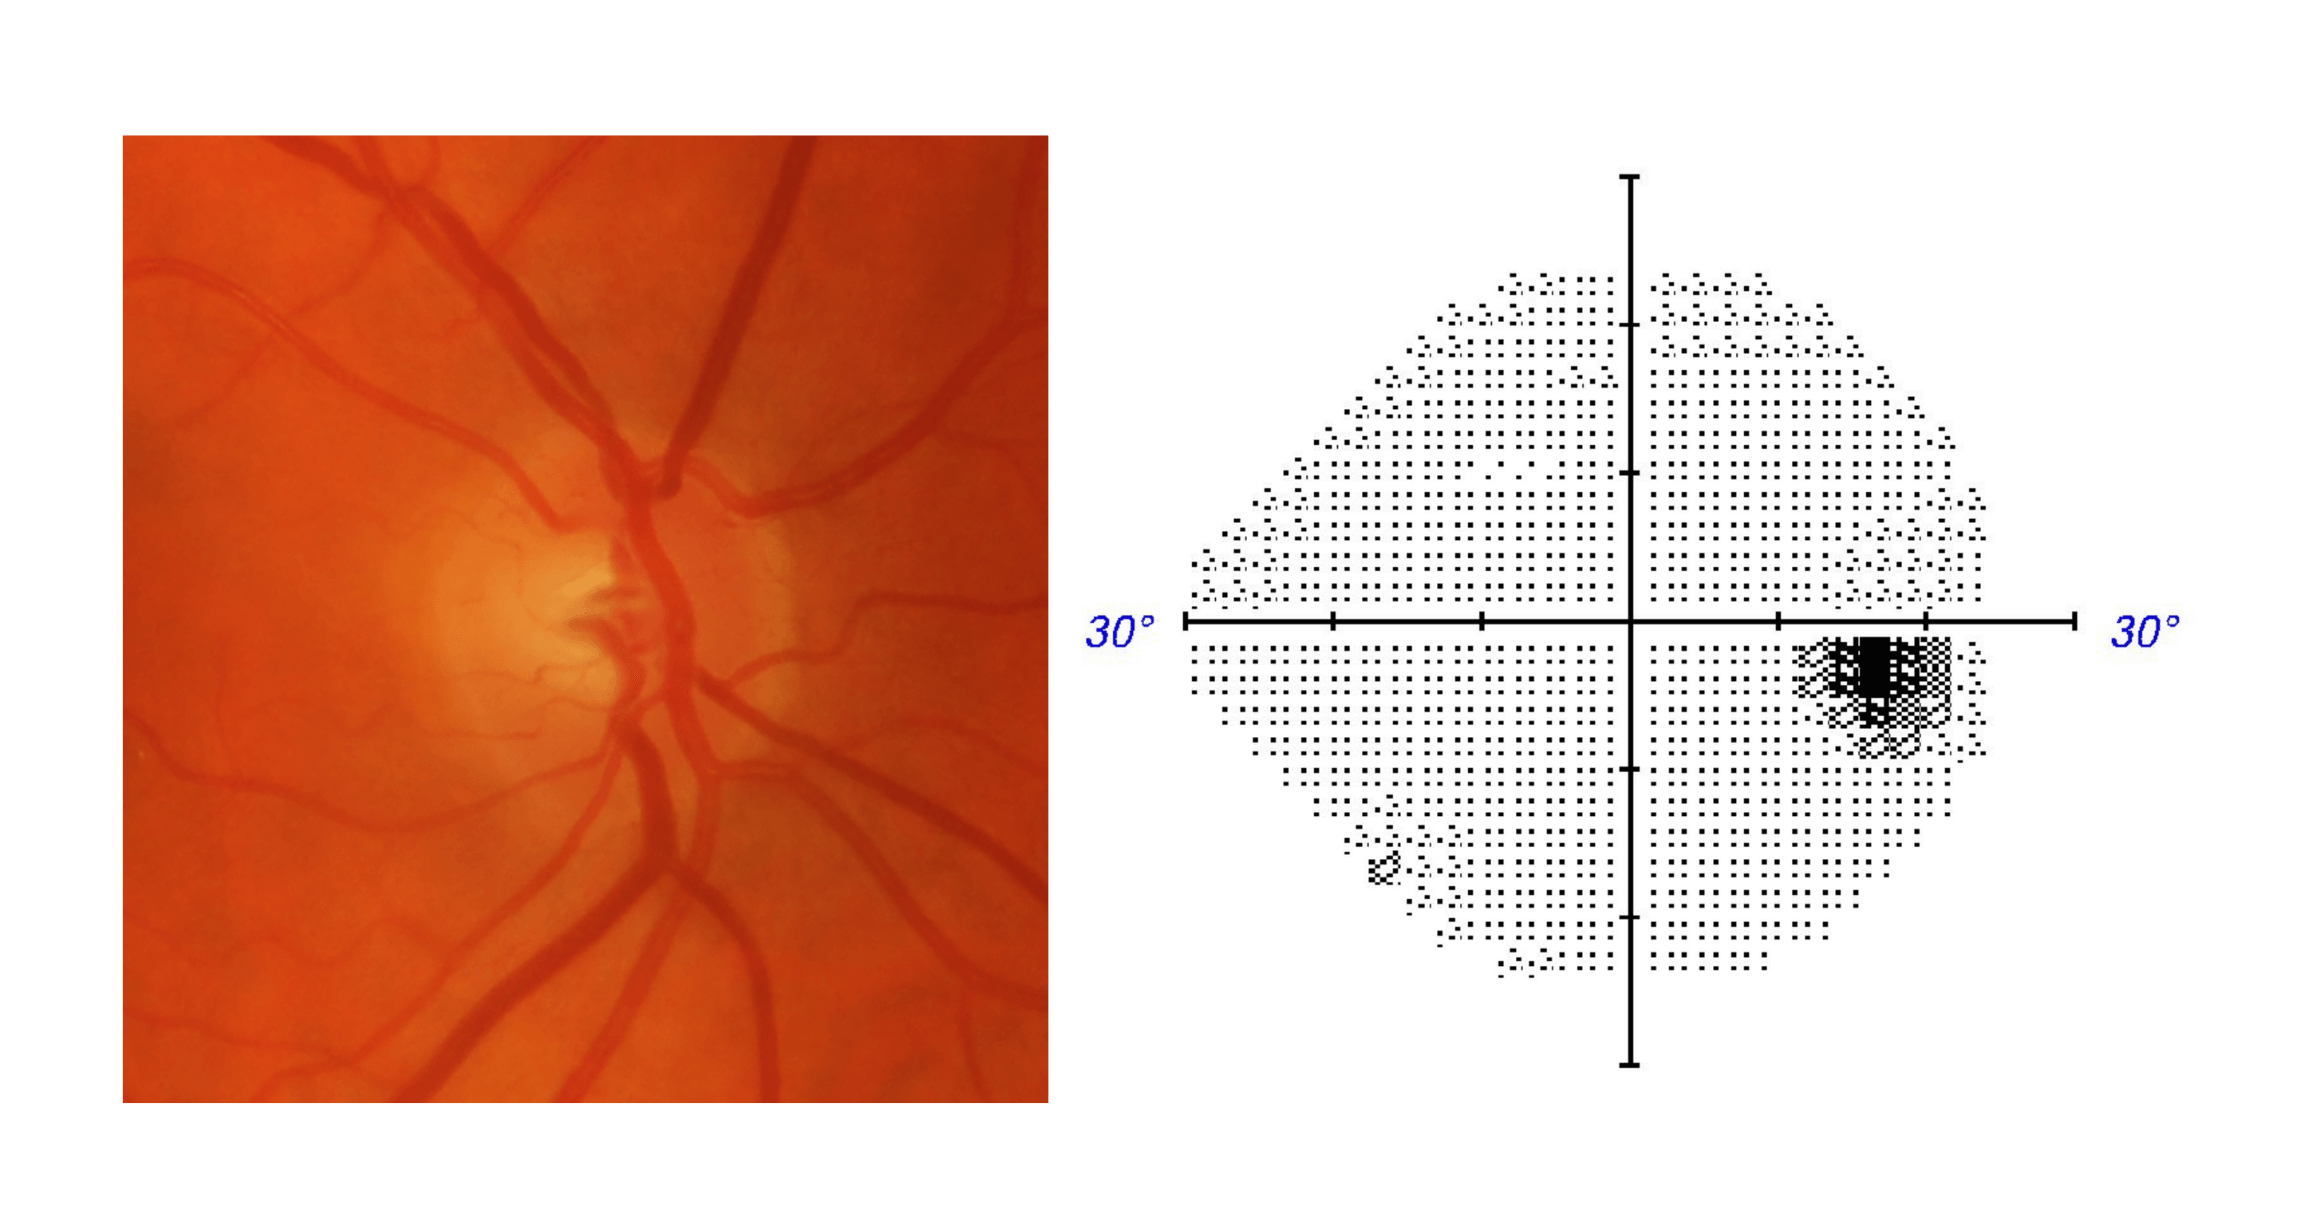 Optic disc photo and visual field test results for a normal eye without glaucoma